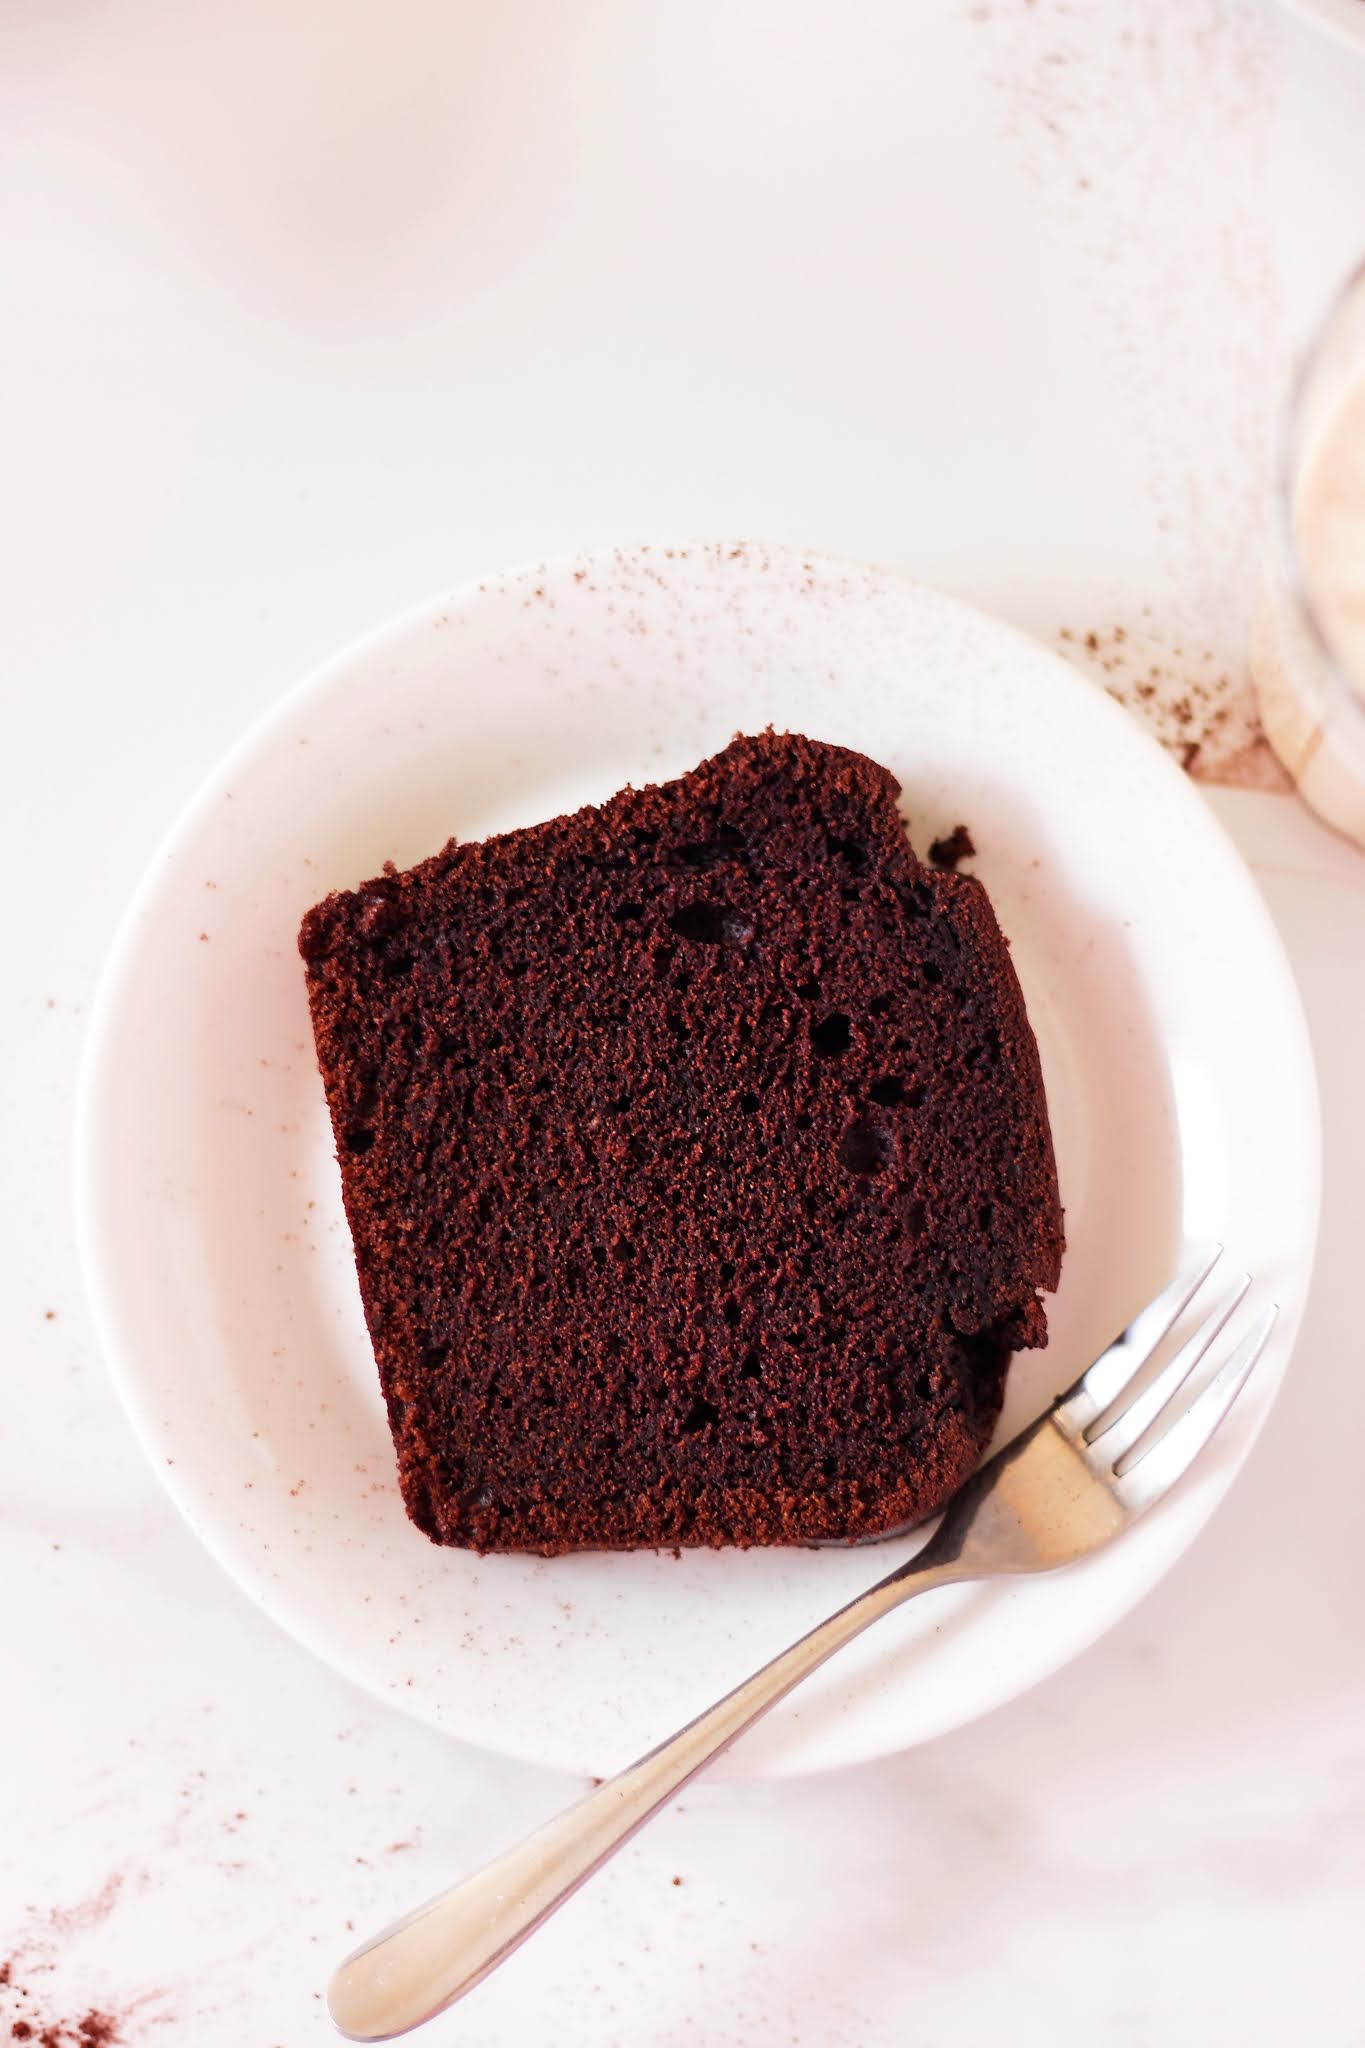 Incredibly delicious and rich chocoate pound cake